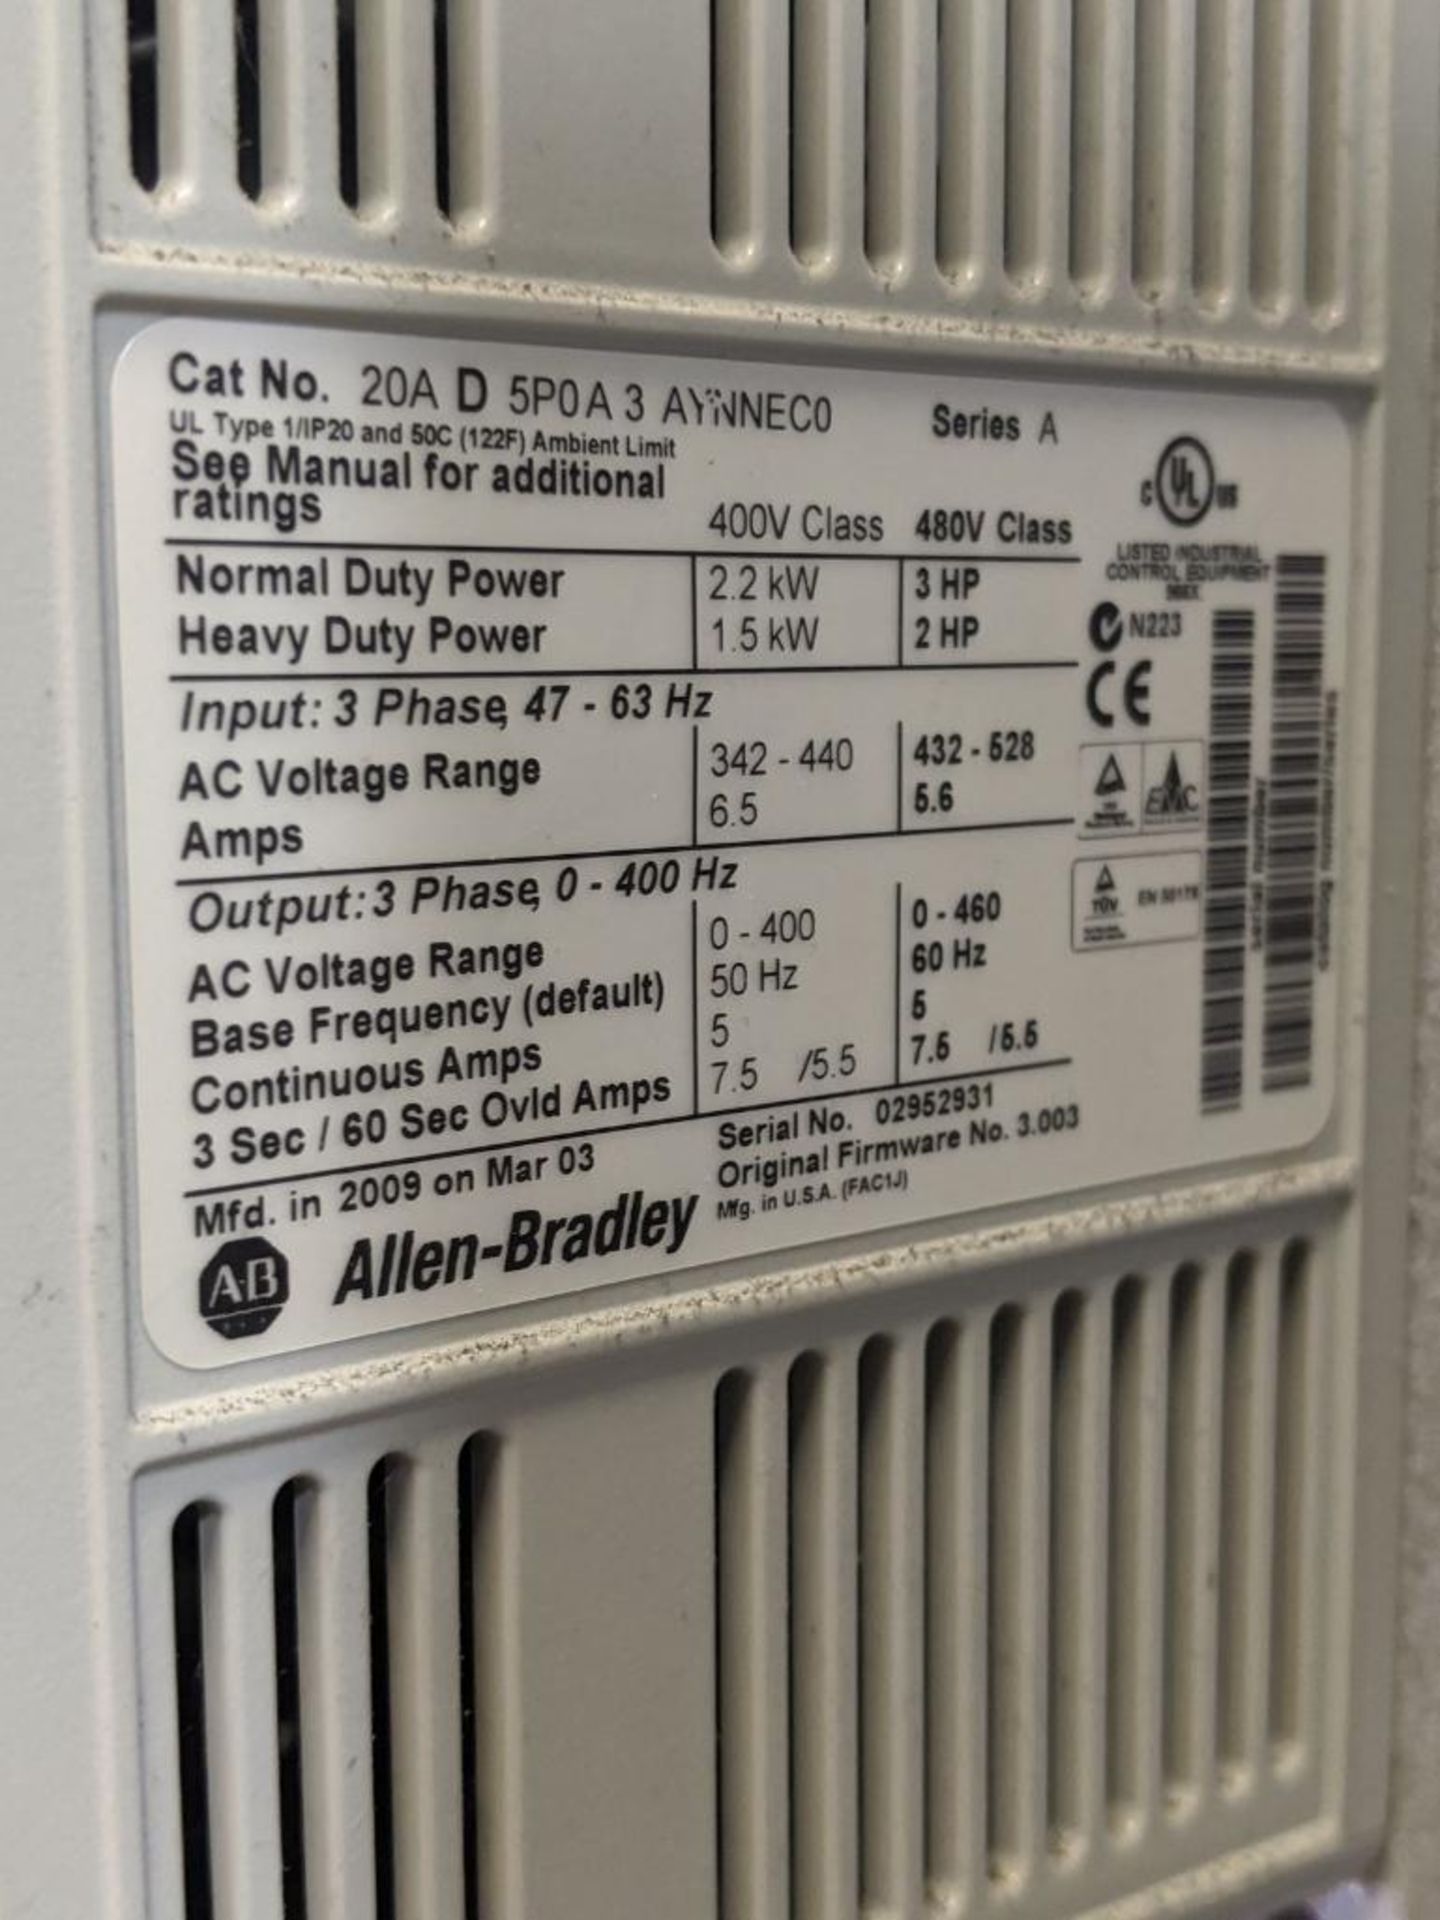 Allen-Bradley PowerFlex 70 Cat No. 20AD5P0A3AYNNEC0 3HP Variable Frequency Drive - Image 4 of 4